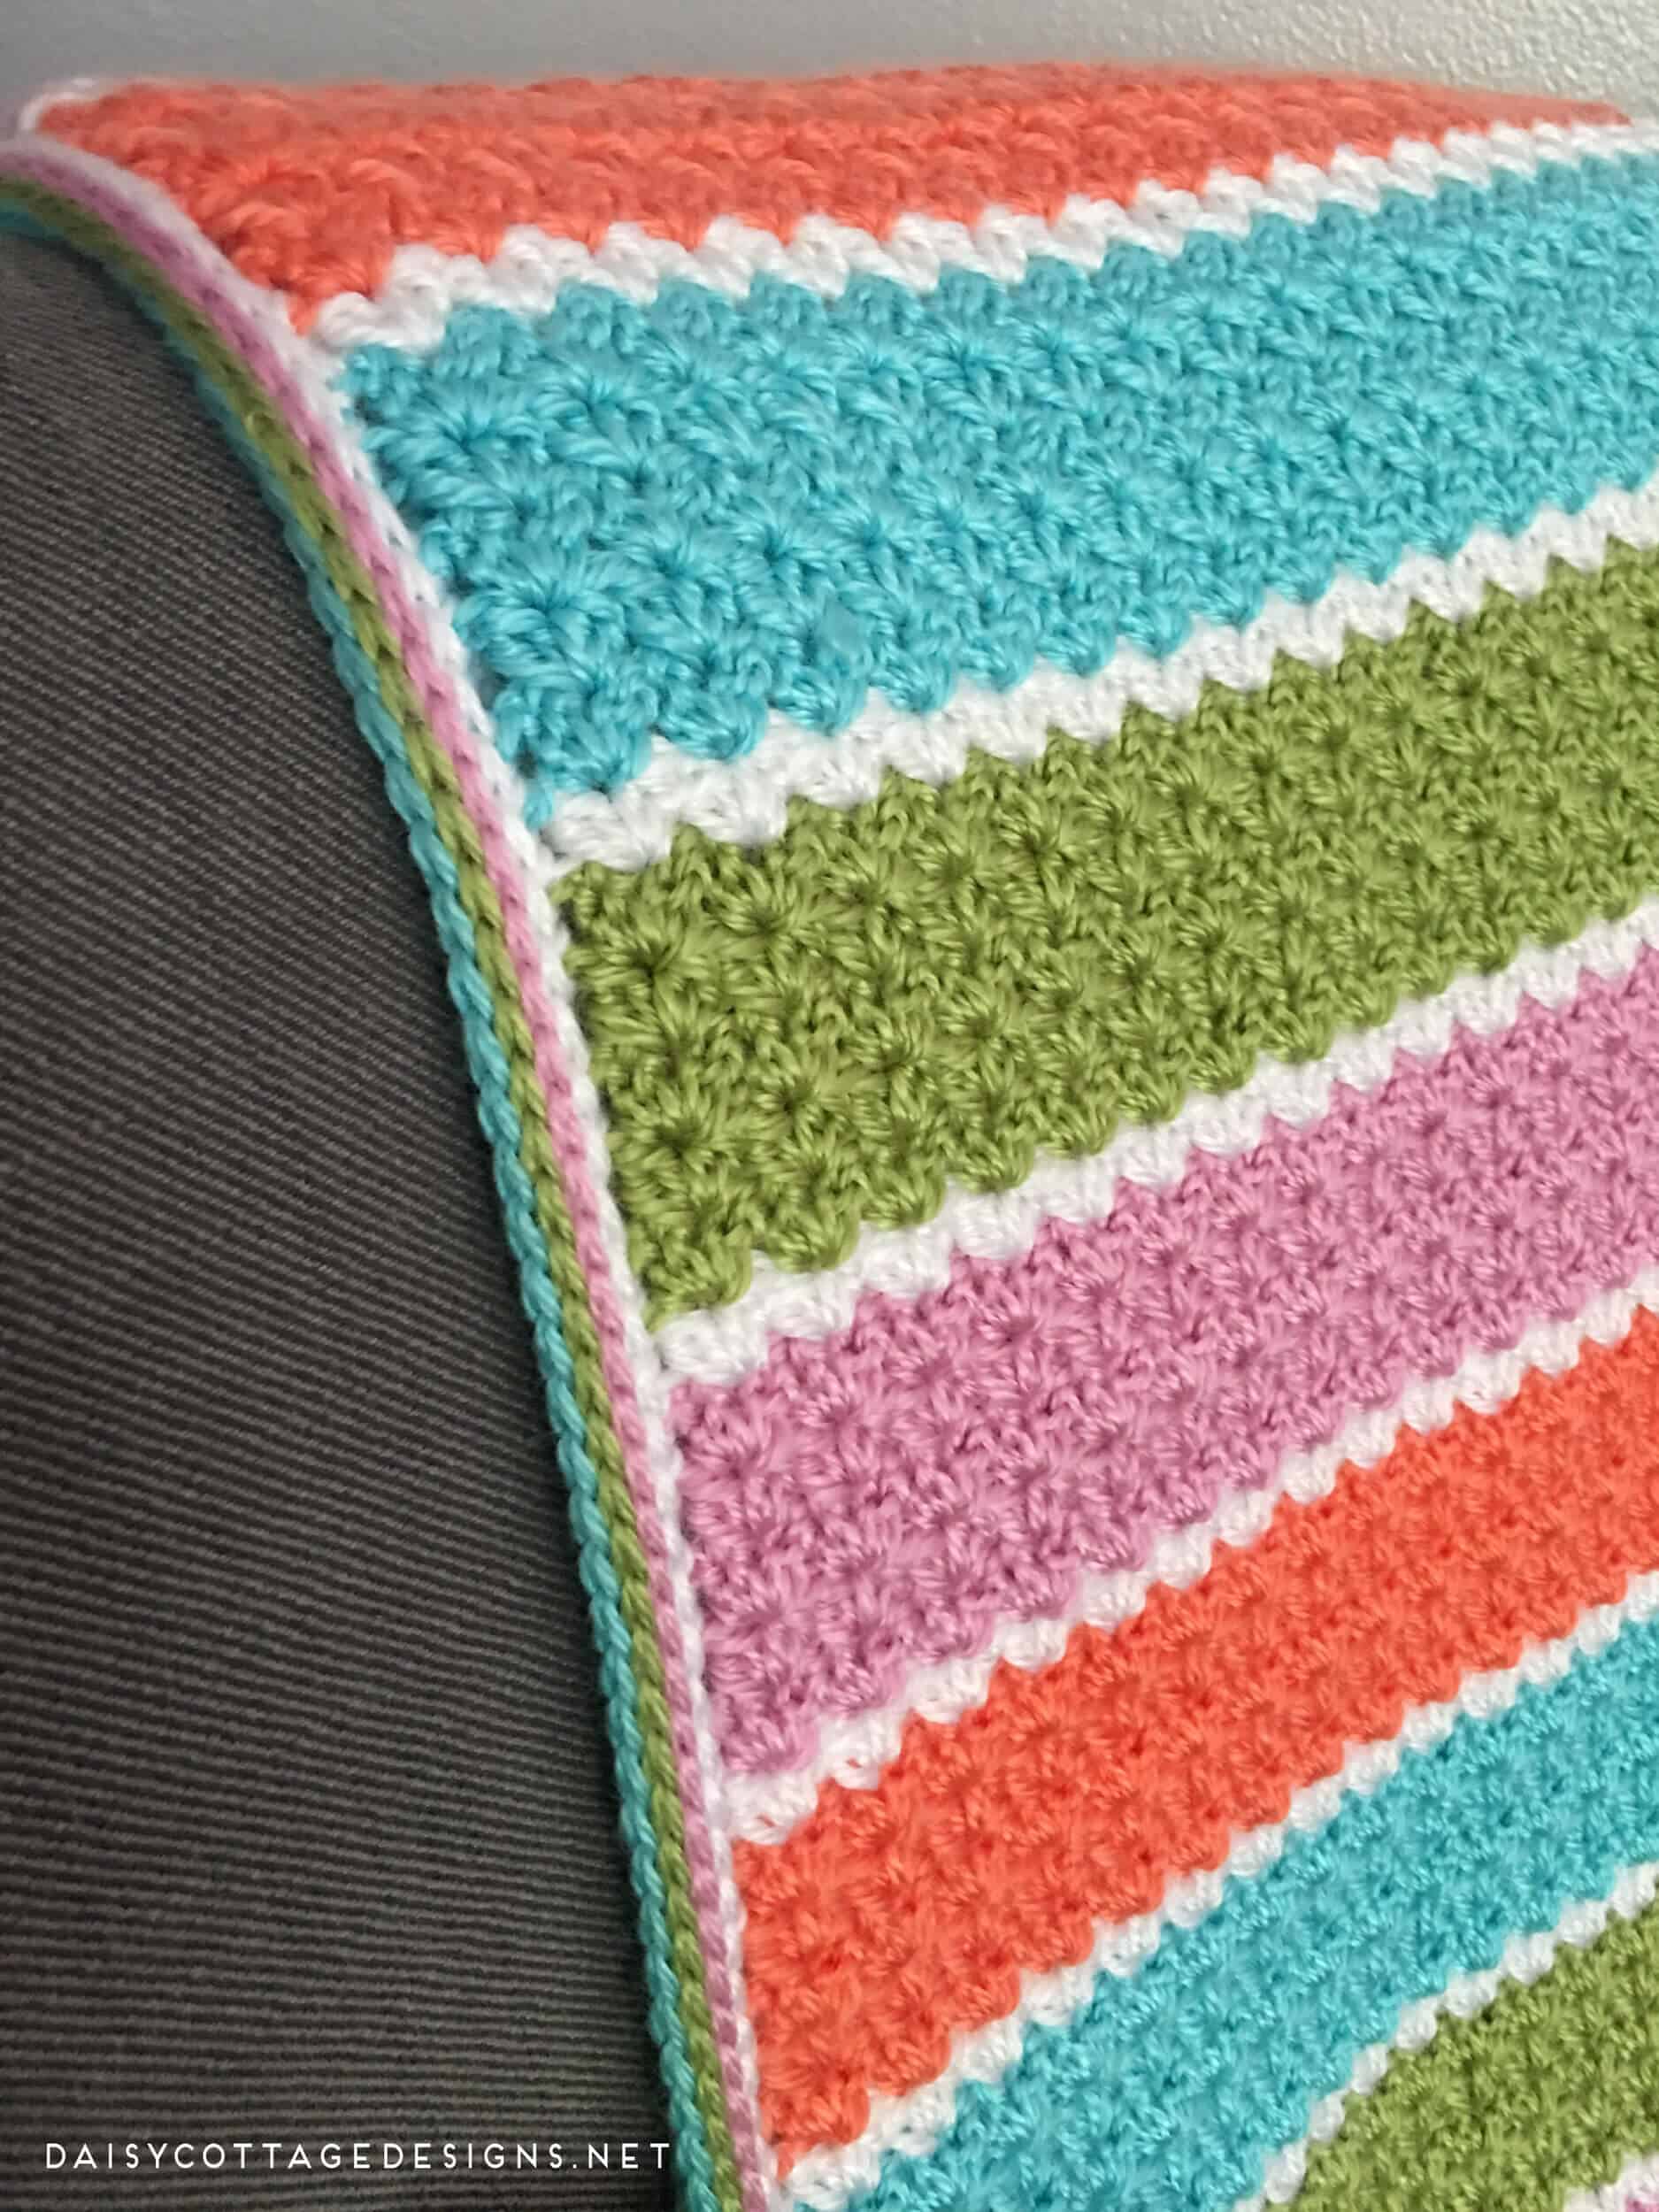 If you're looking for a free crochet blanket pattern that works up quickly, this easy v-stitch blanket from Daisy Cottage Designs is the way to go! | free crochet pattern, easy crochet blanket pattern, striped baby blanket pattern